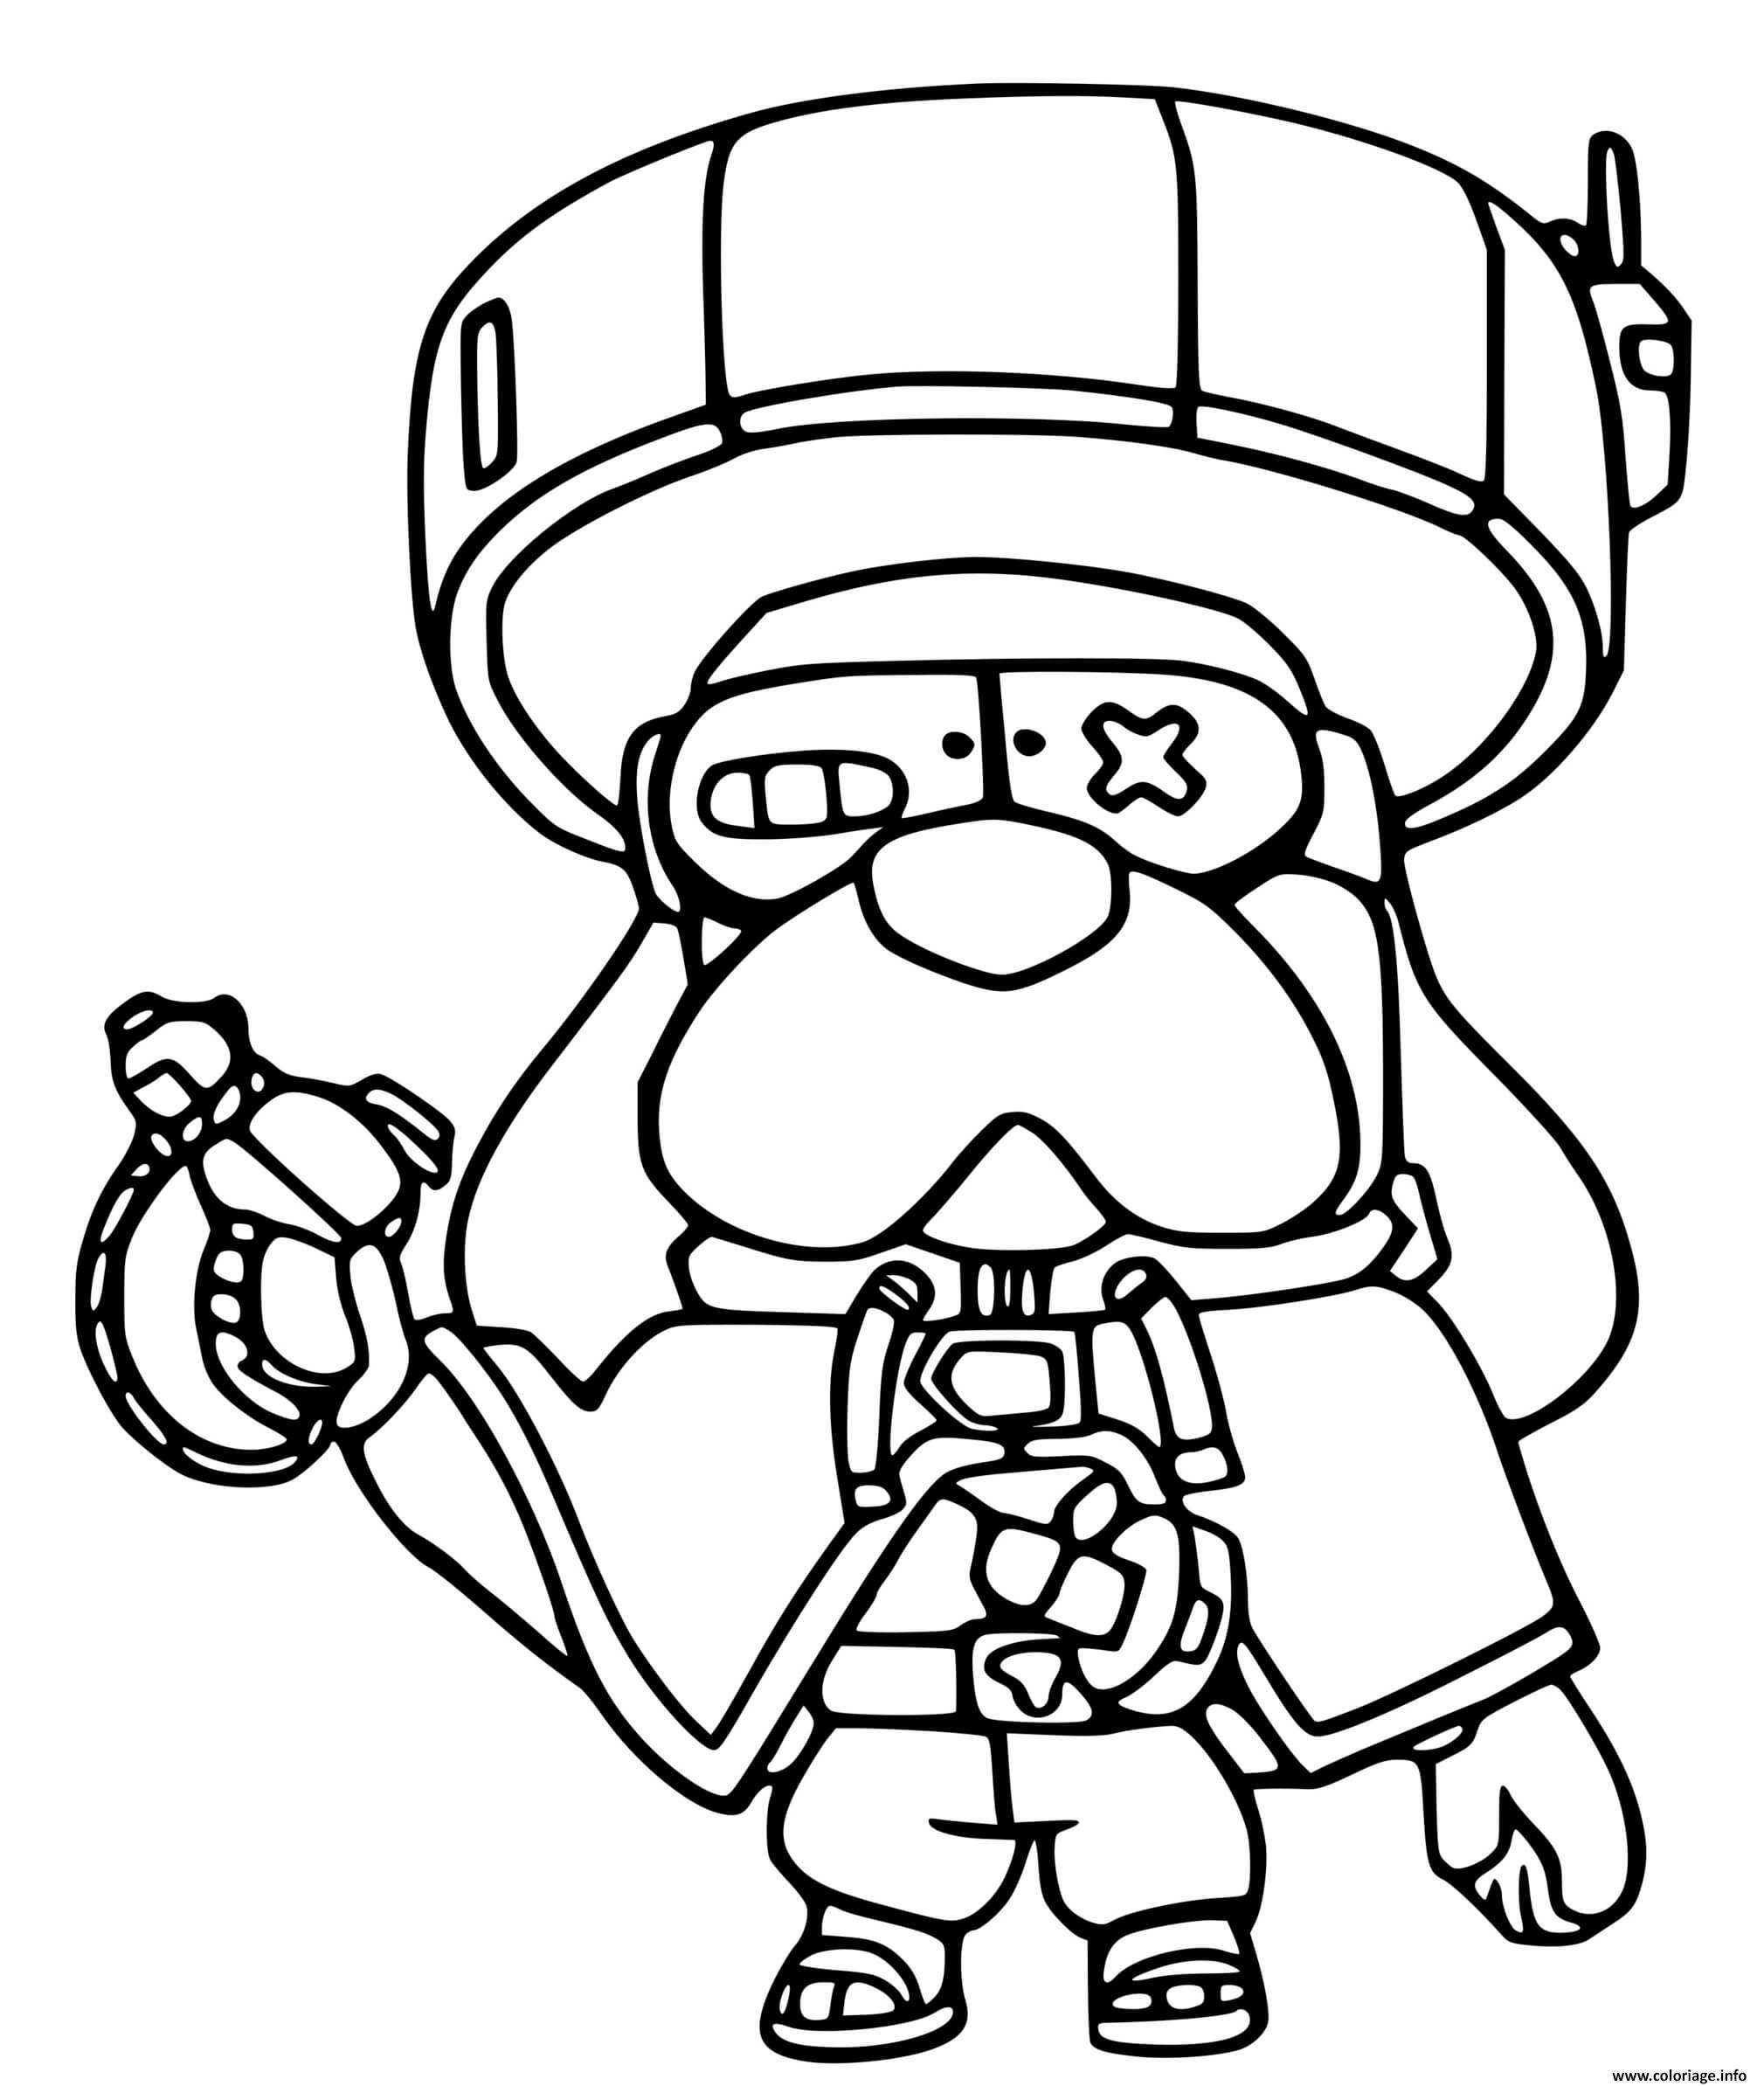 Coloriage Brawl Stars Force Starr Medor Ronin Dessin Brawl Stars A Imprimer - image brawl stars noir et blanc coloriage